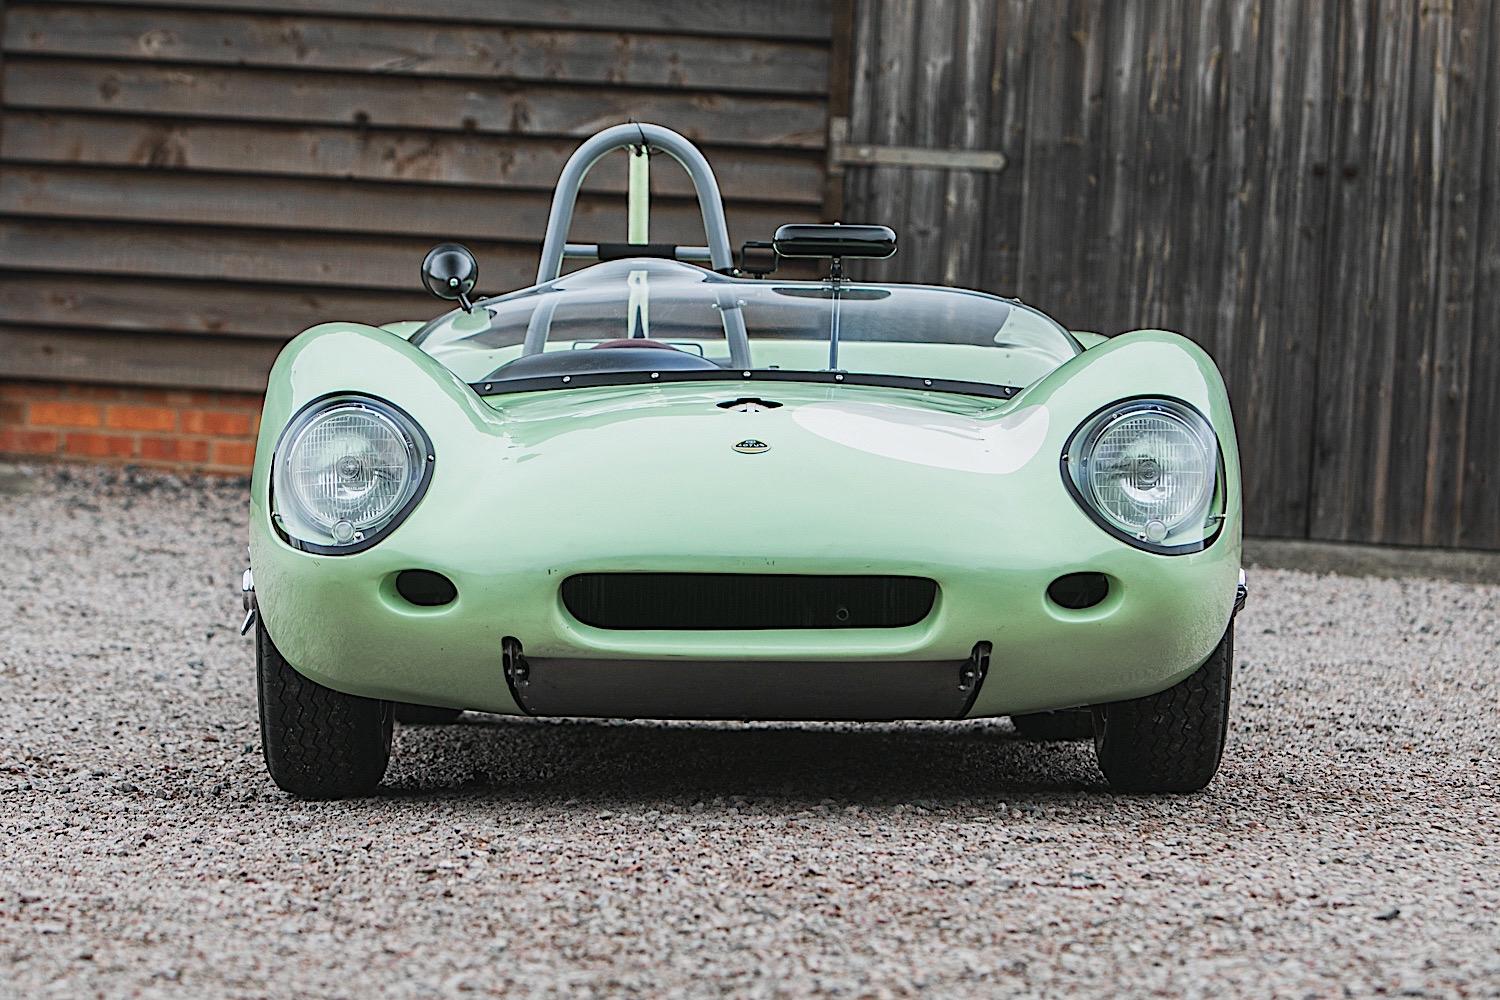 1960 Lotus 19 Monte Carlo - Chassis '953'